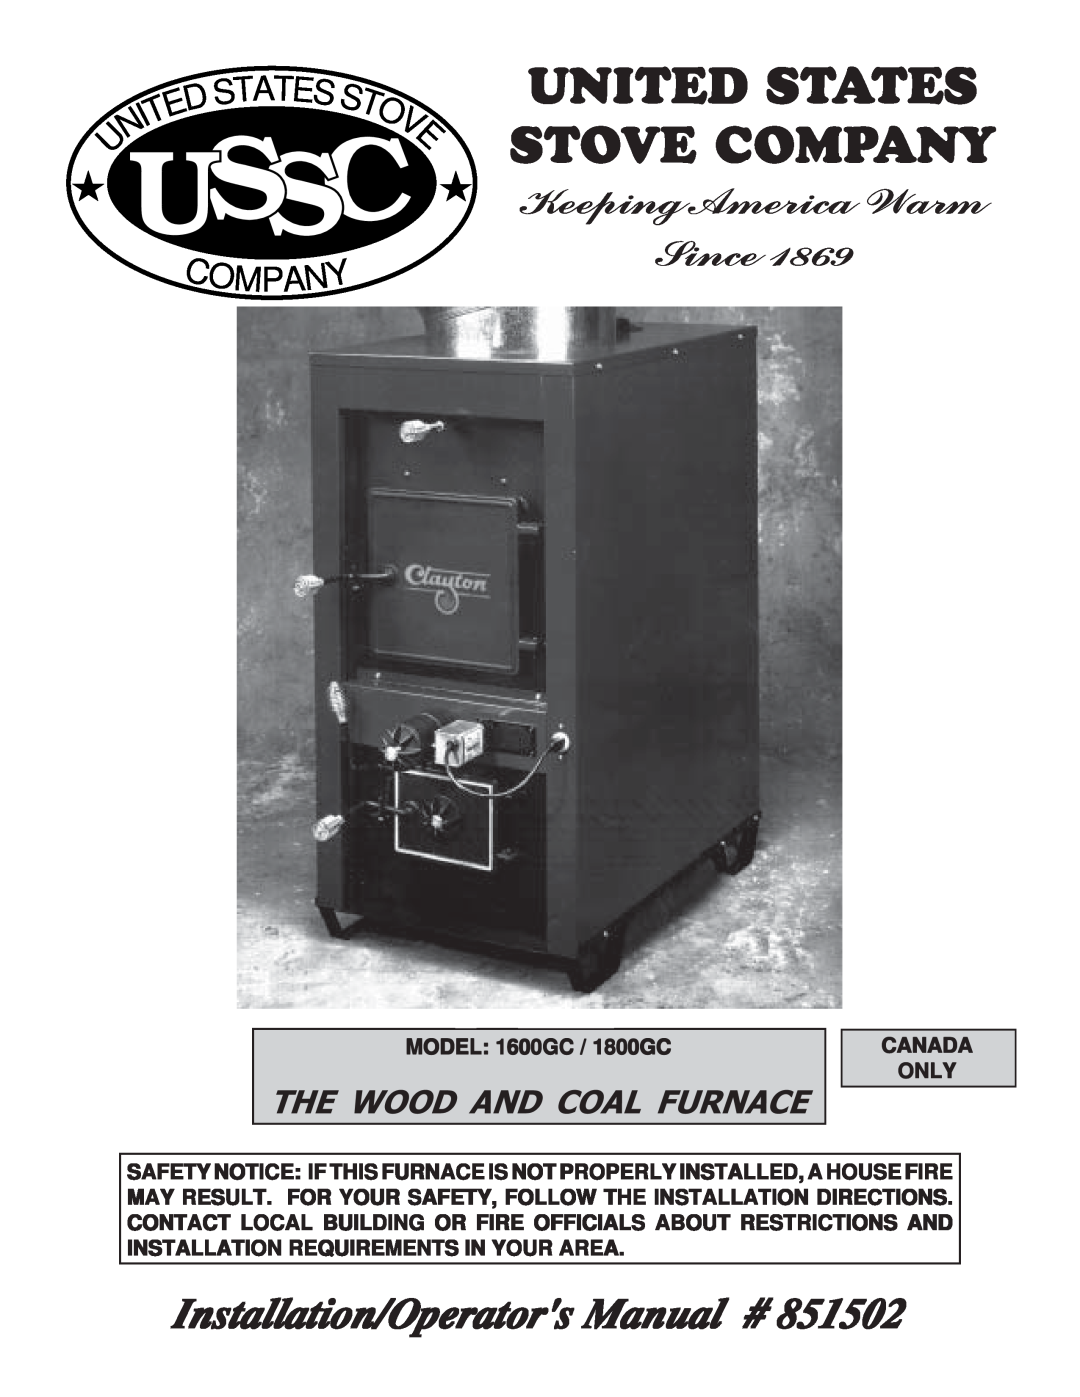 United States Stove manual MODEL 1600GC / 1800GC, Canada Only, Ussc, Installation/Operators Manual #, Since, Mpan 